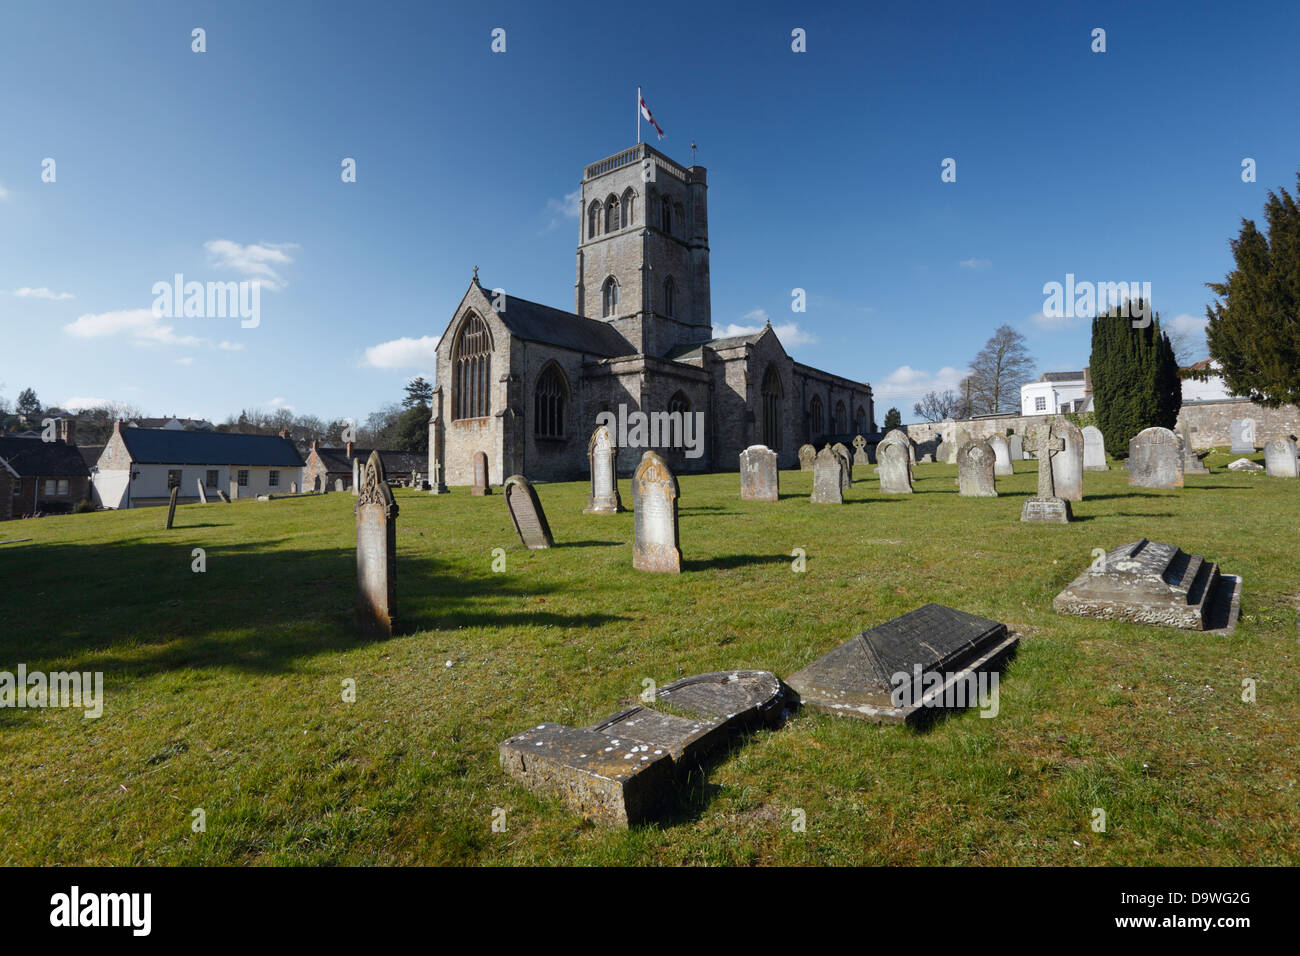 The Church of St Mary. Wedmore. Somerset. England. UK. Stock Photo